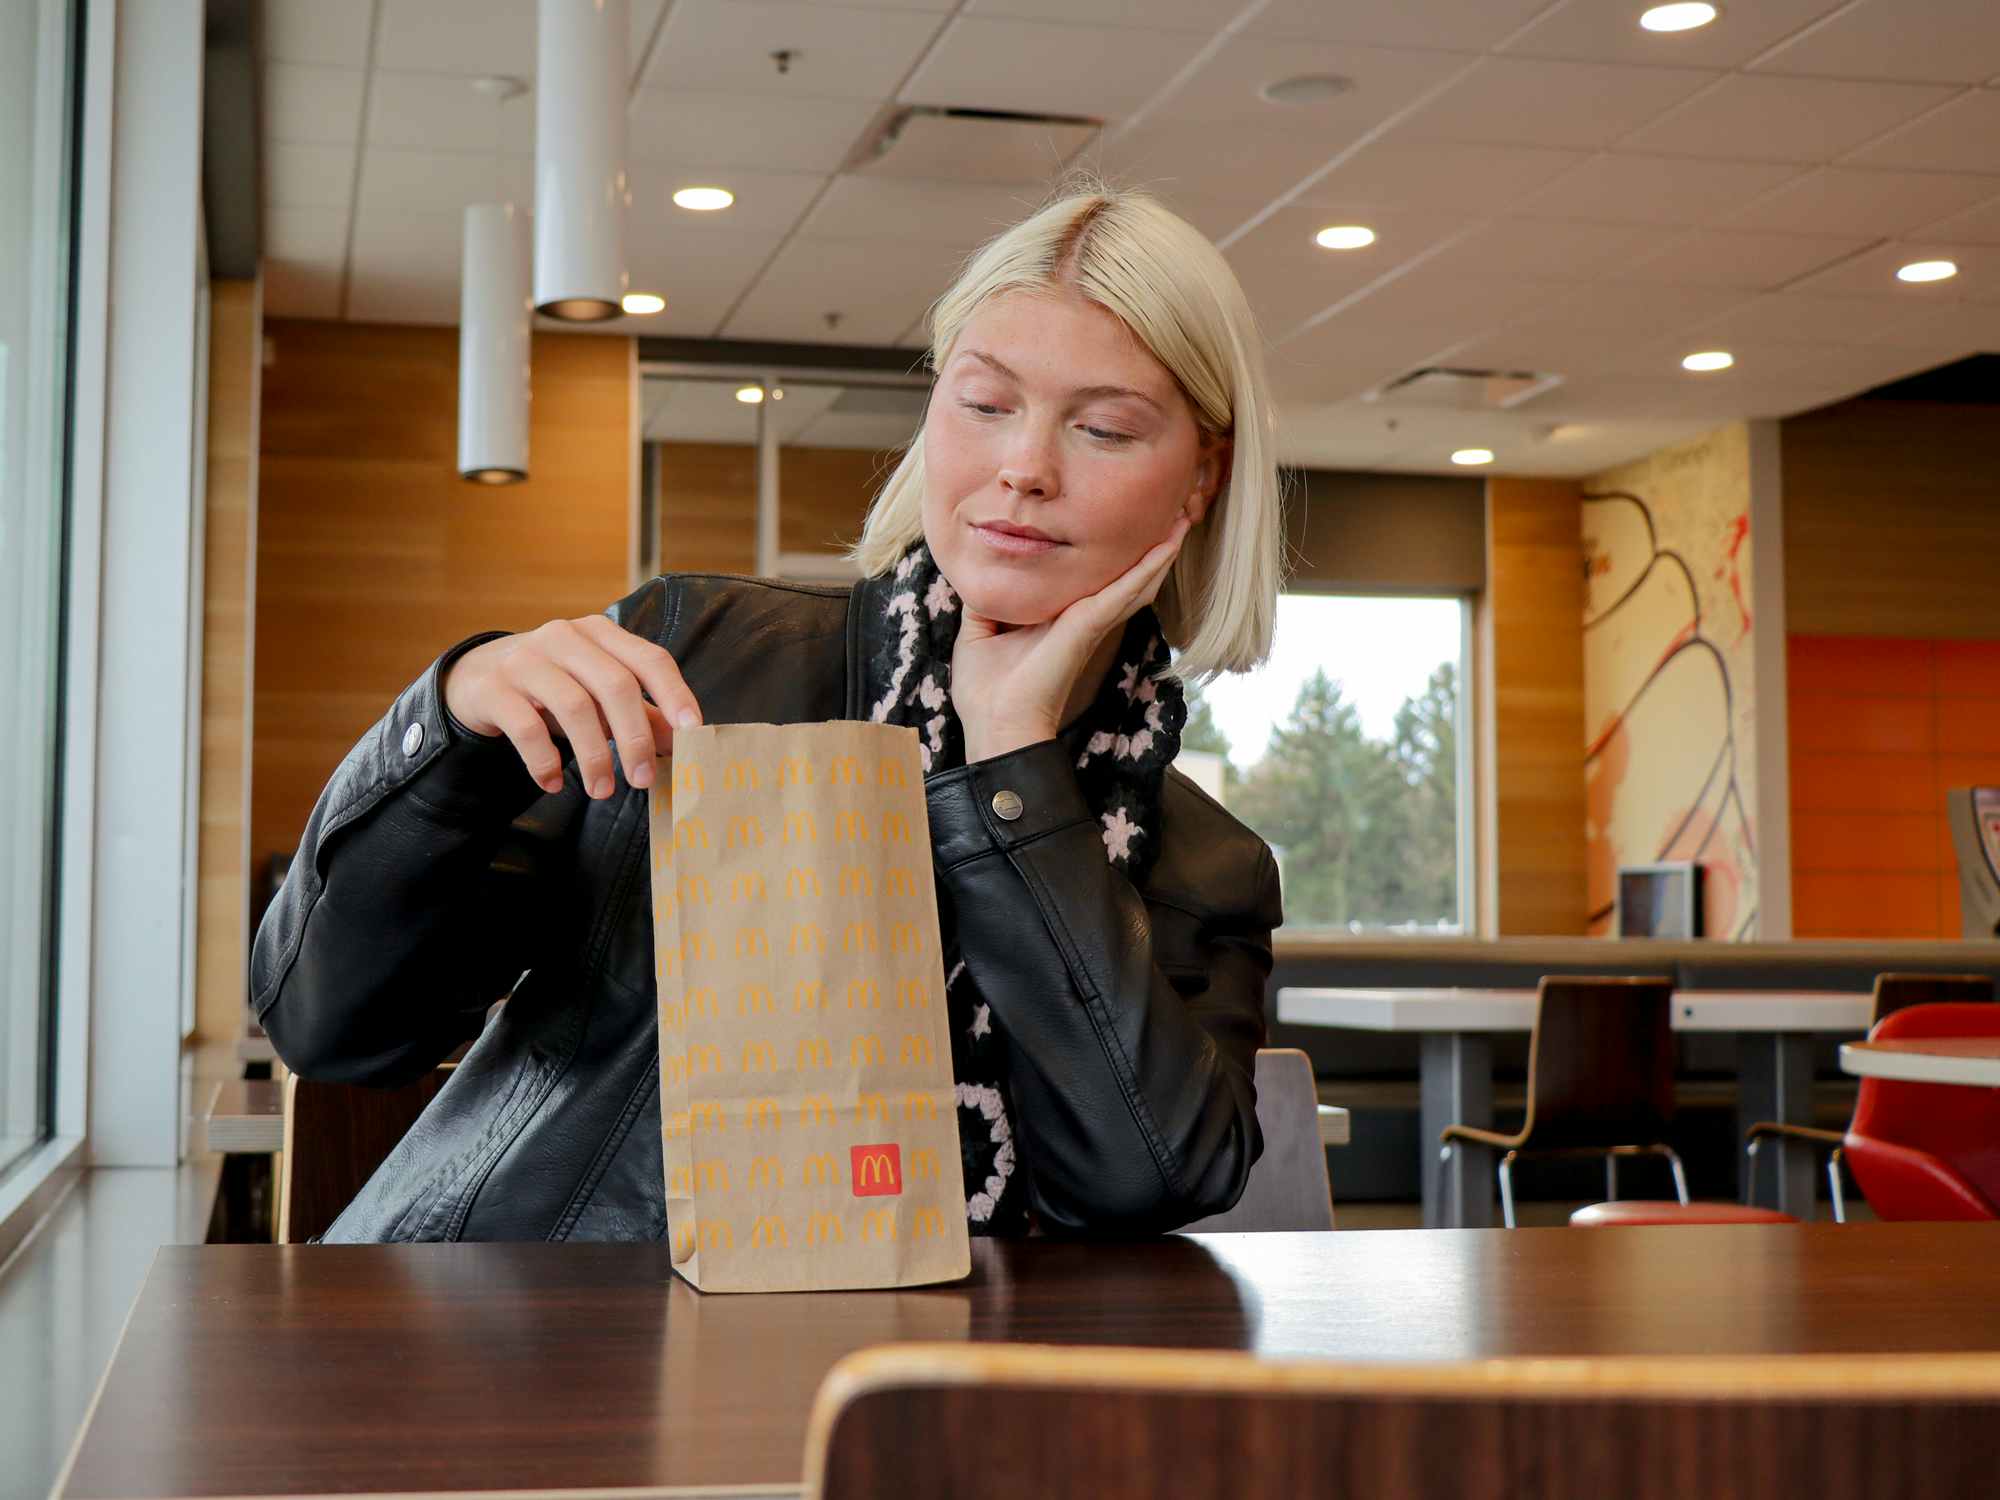 a person sitting with a mcdonalds bag